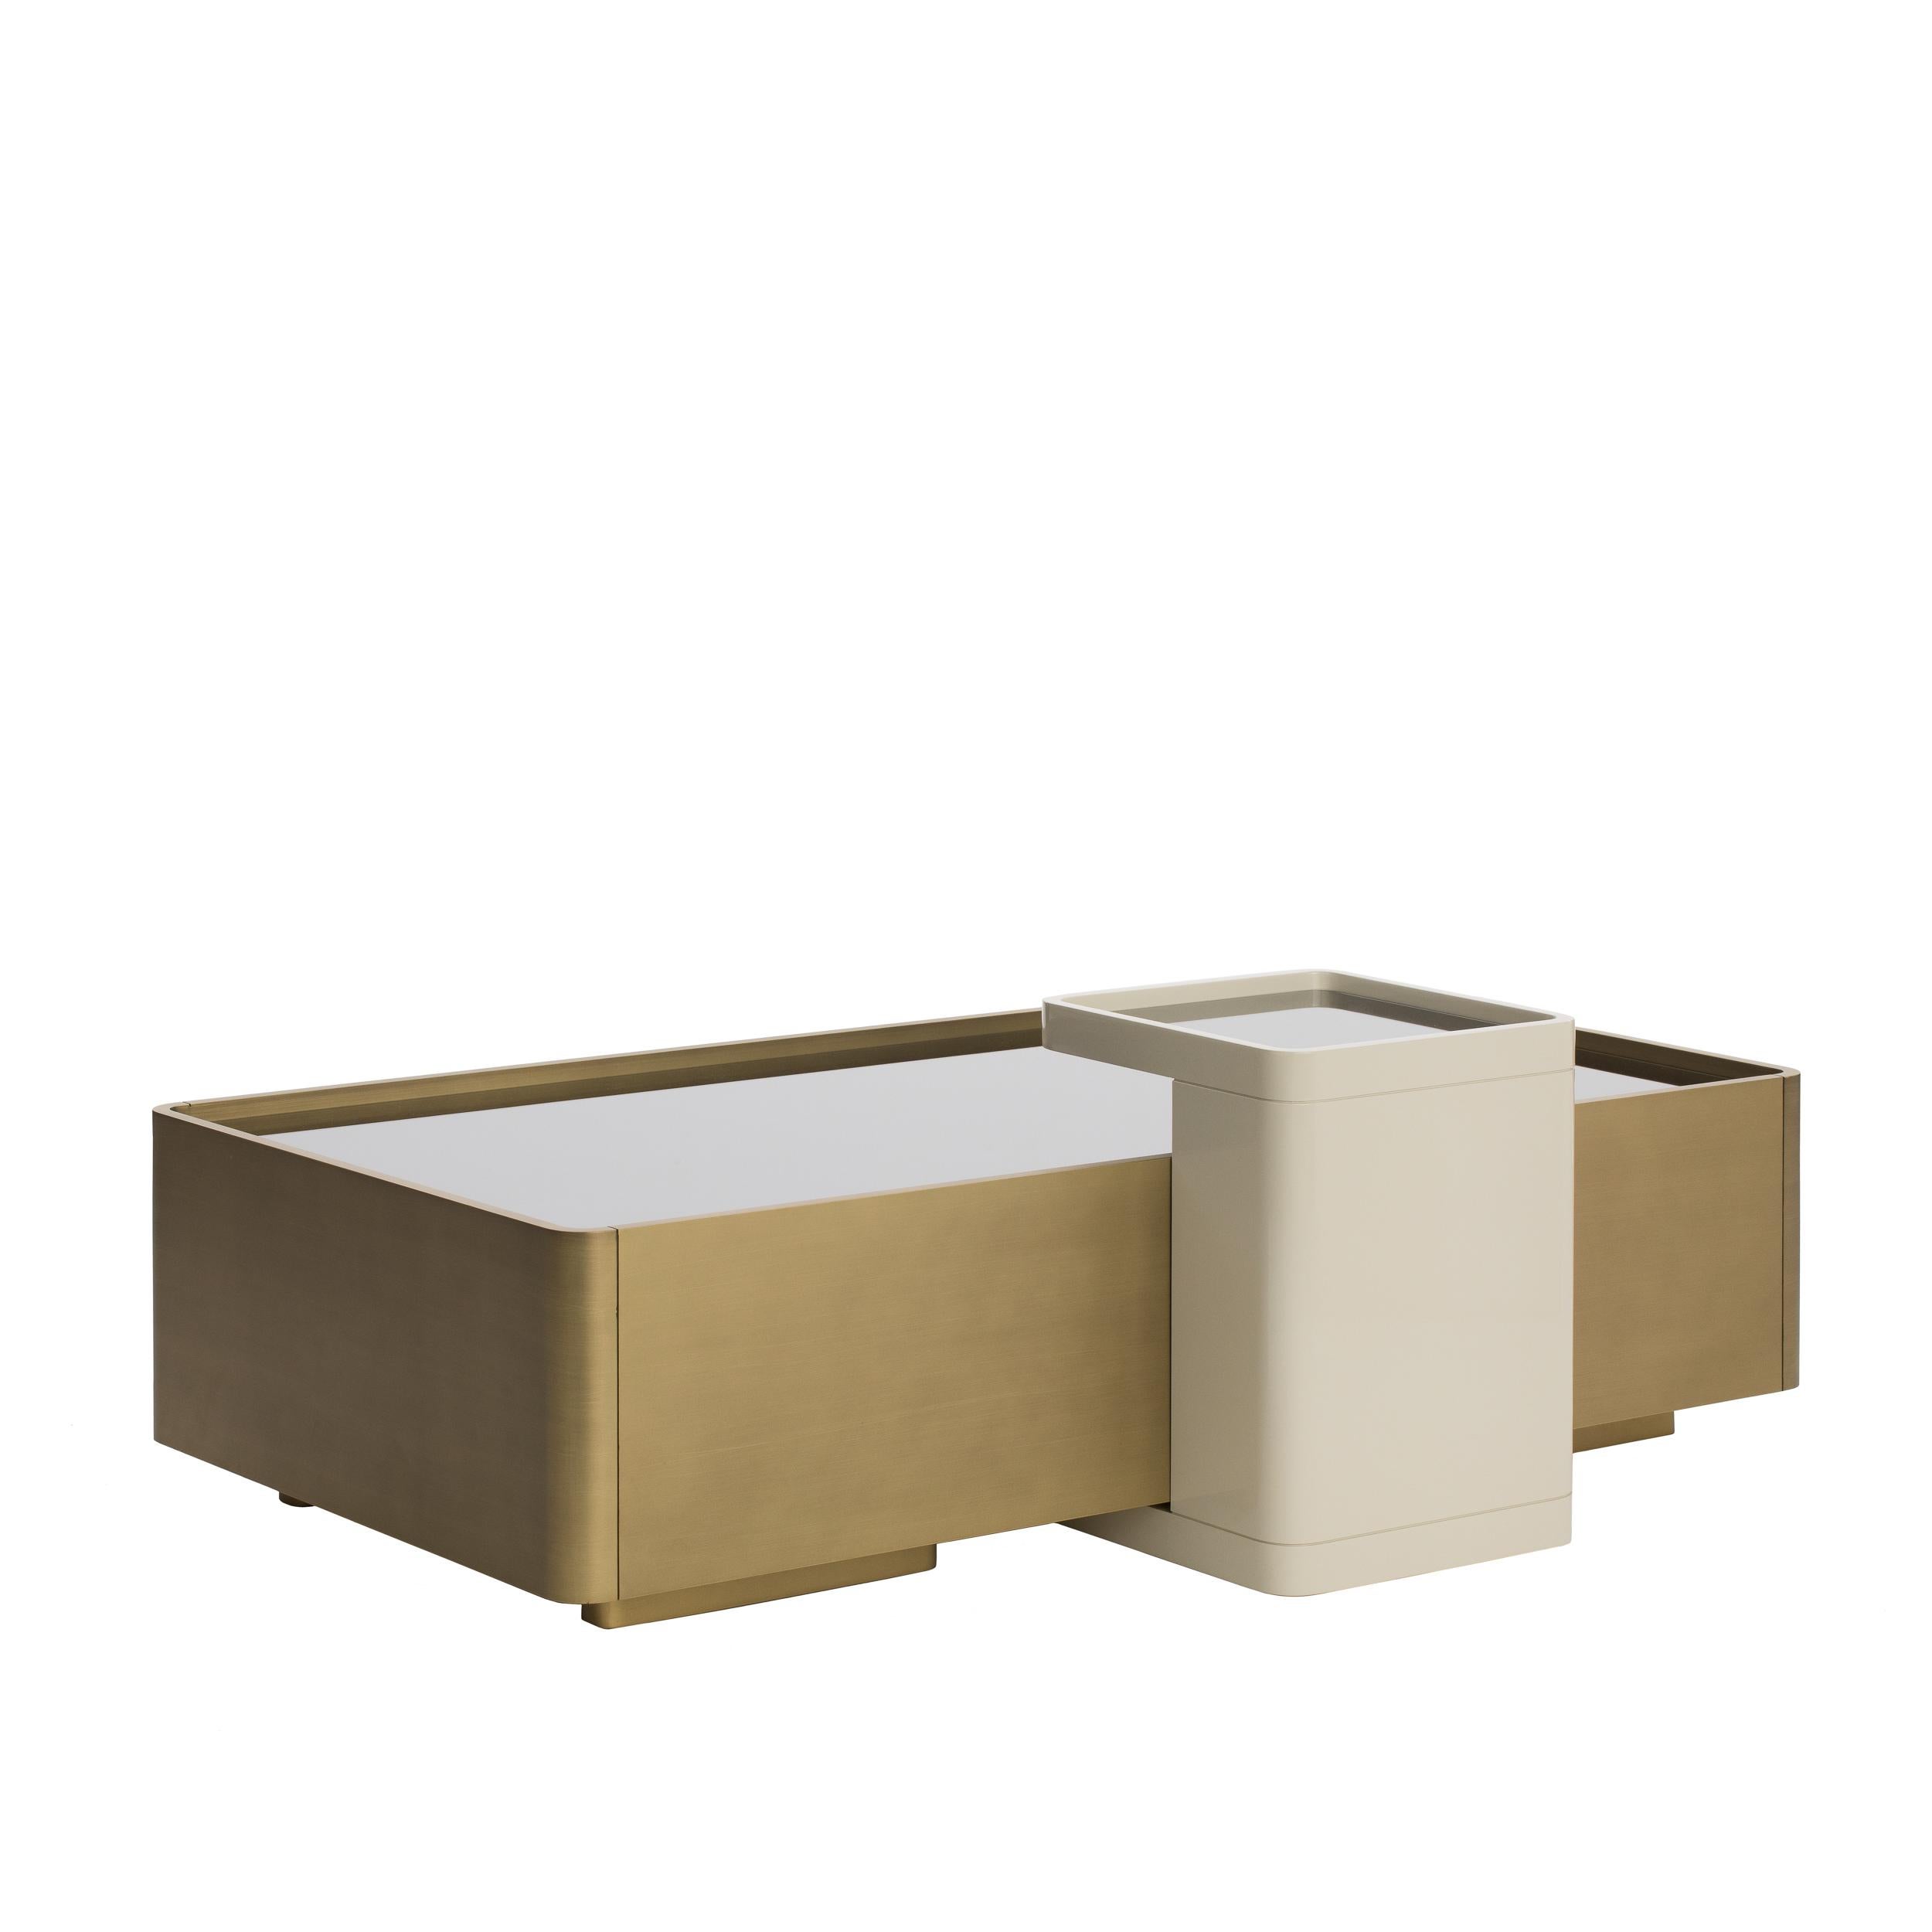 SÊNI is a versatile side table can be used individually, next to the armrest of a sofa or in combination with the rectangular coffee table Sêni.‎ It is made of lacquered wood with a mirrored glass top.‎ It can be finished with any color or veneered